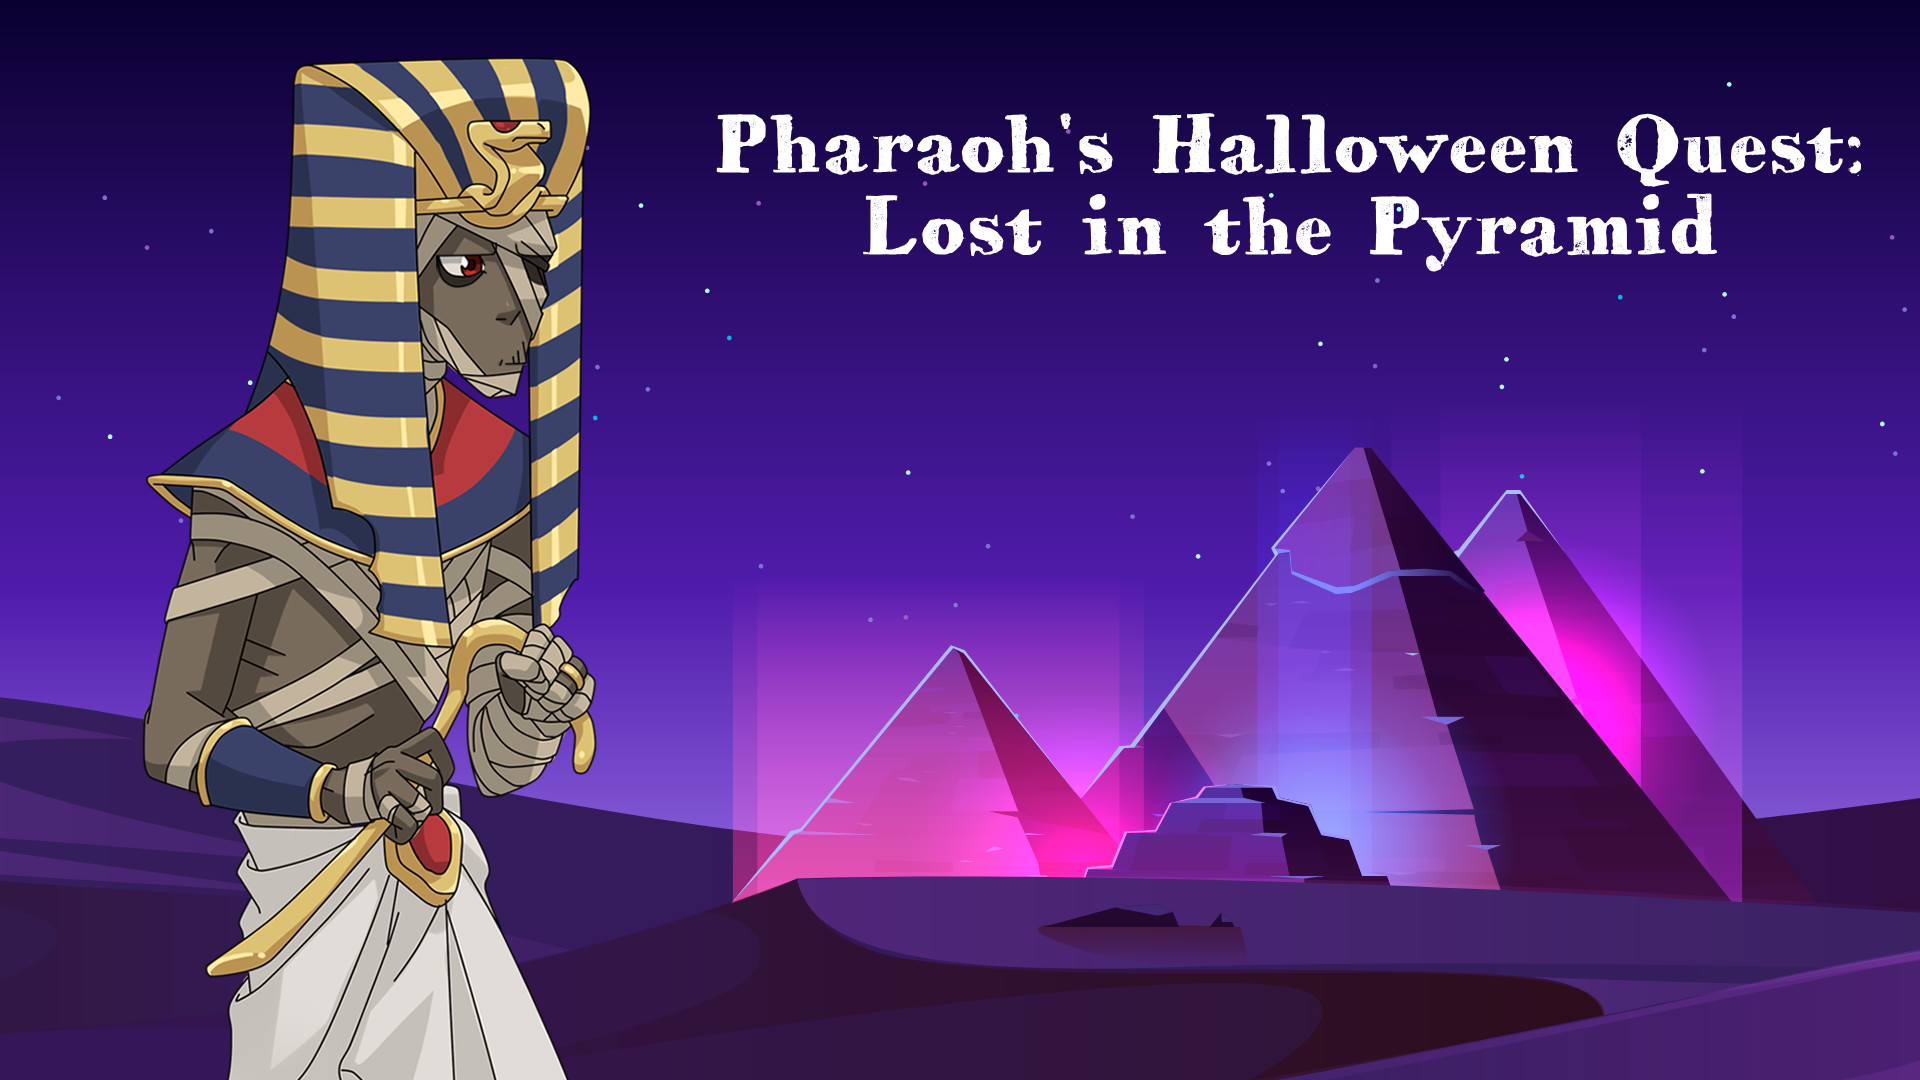 Pharaoh's Halloween Quest: Lost in the Pyramid